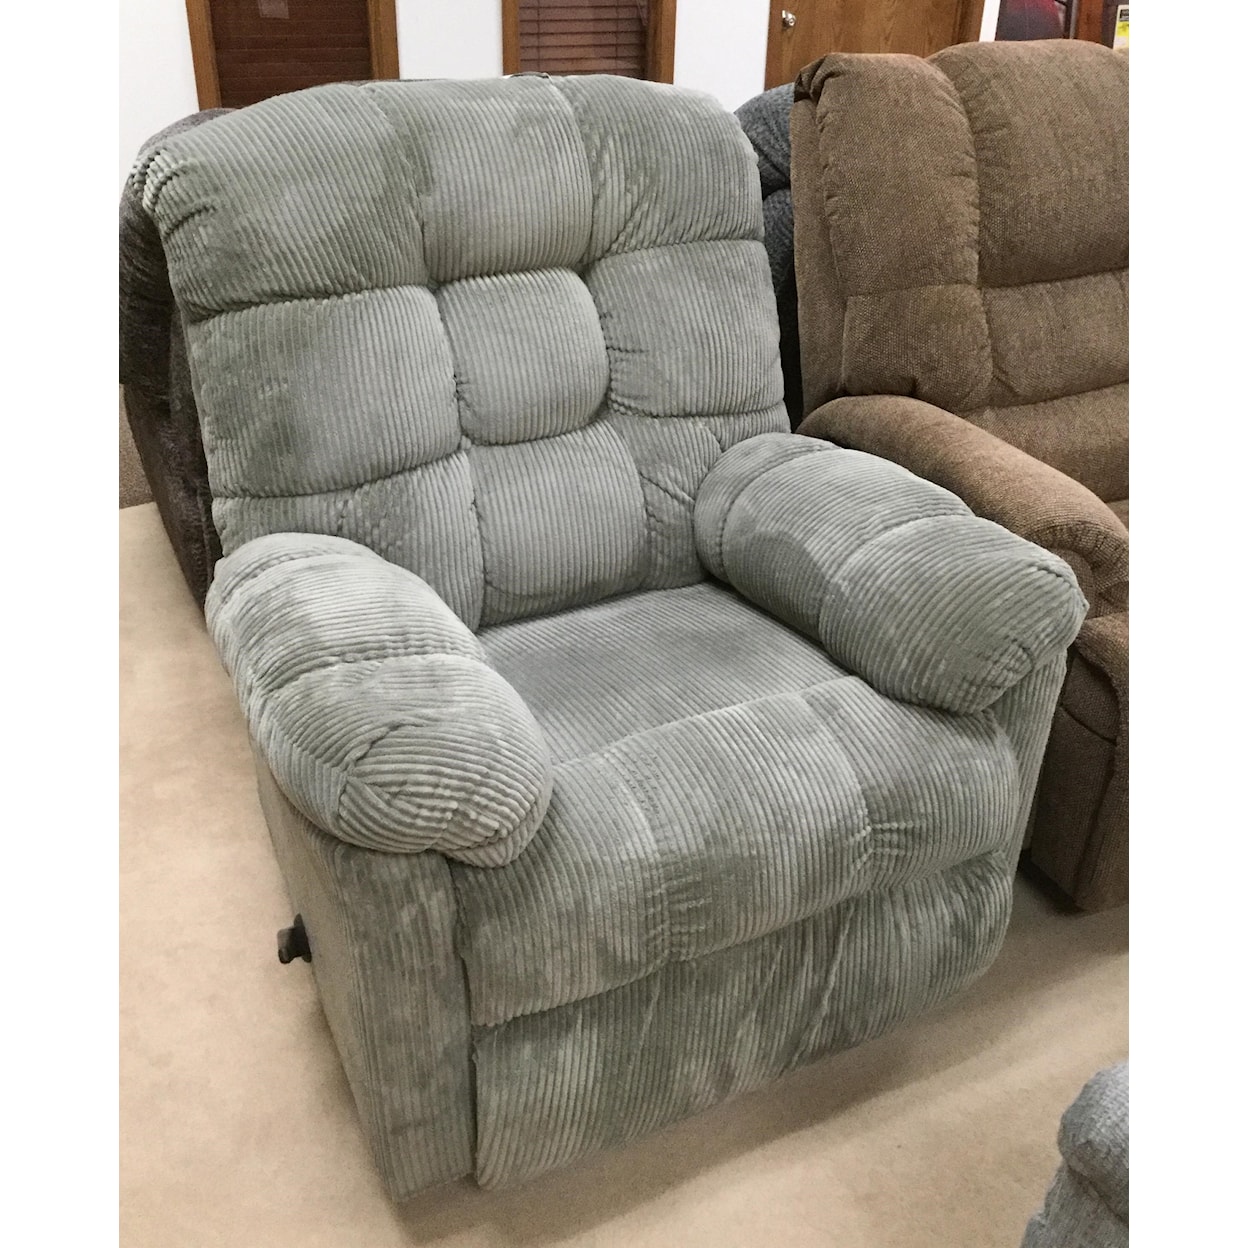 Serta Upholstery by Hughes Furniture 400 Recliner